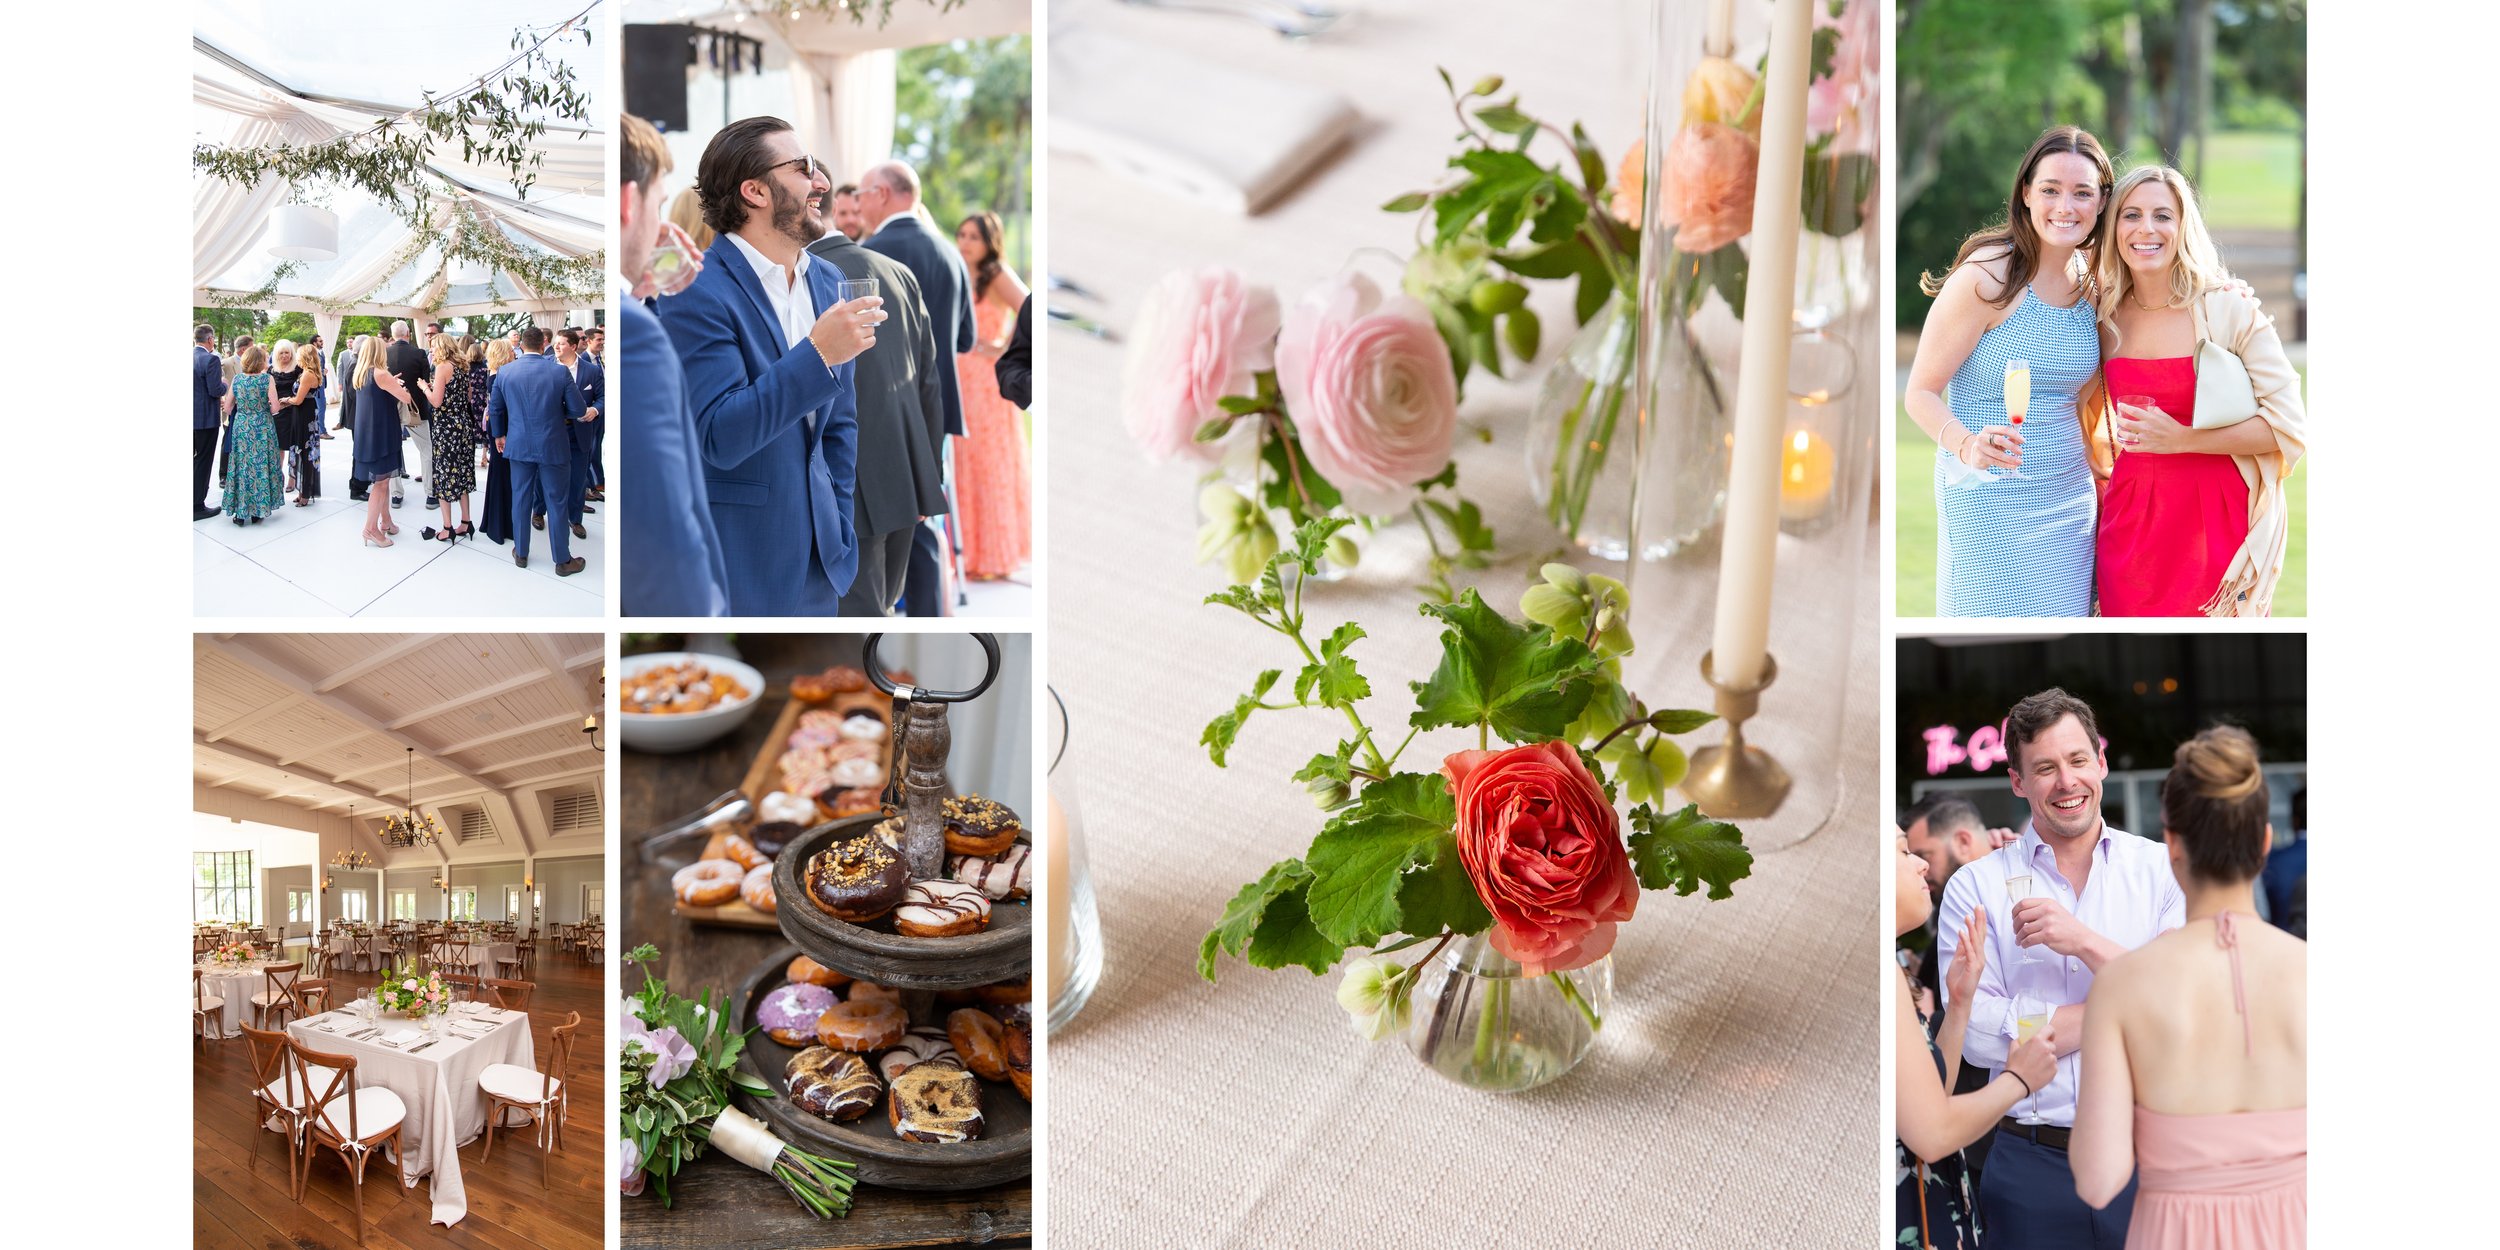 Spring Wedding - Cocktail Hour and details 